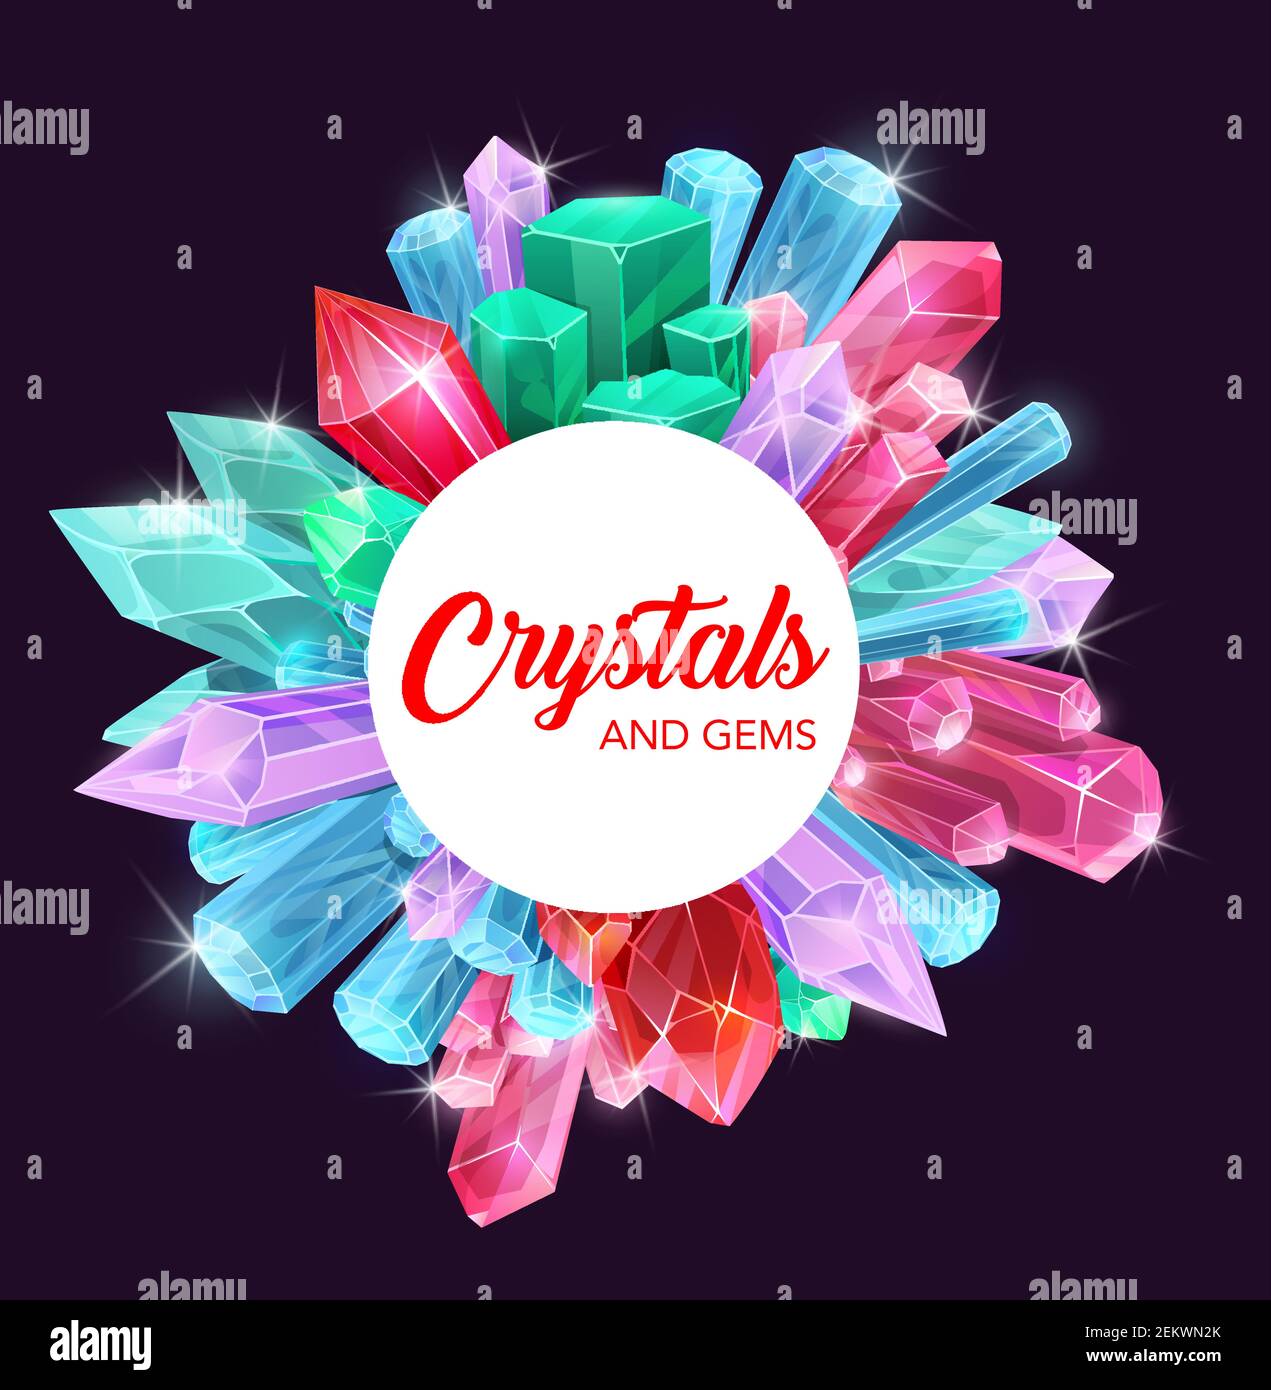 Crystals of gemstones and mineral rocks vector design with precious gems of diamond, pink quartz and blue sapphire. Jewels and magic stones frame of a Stock Vector